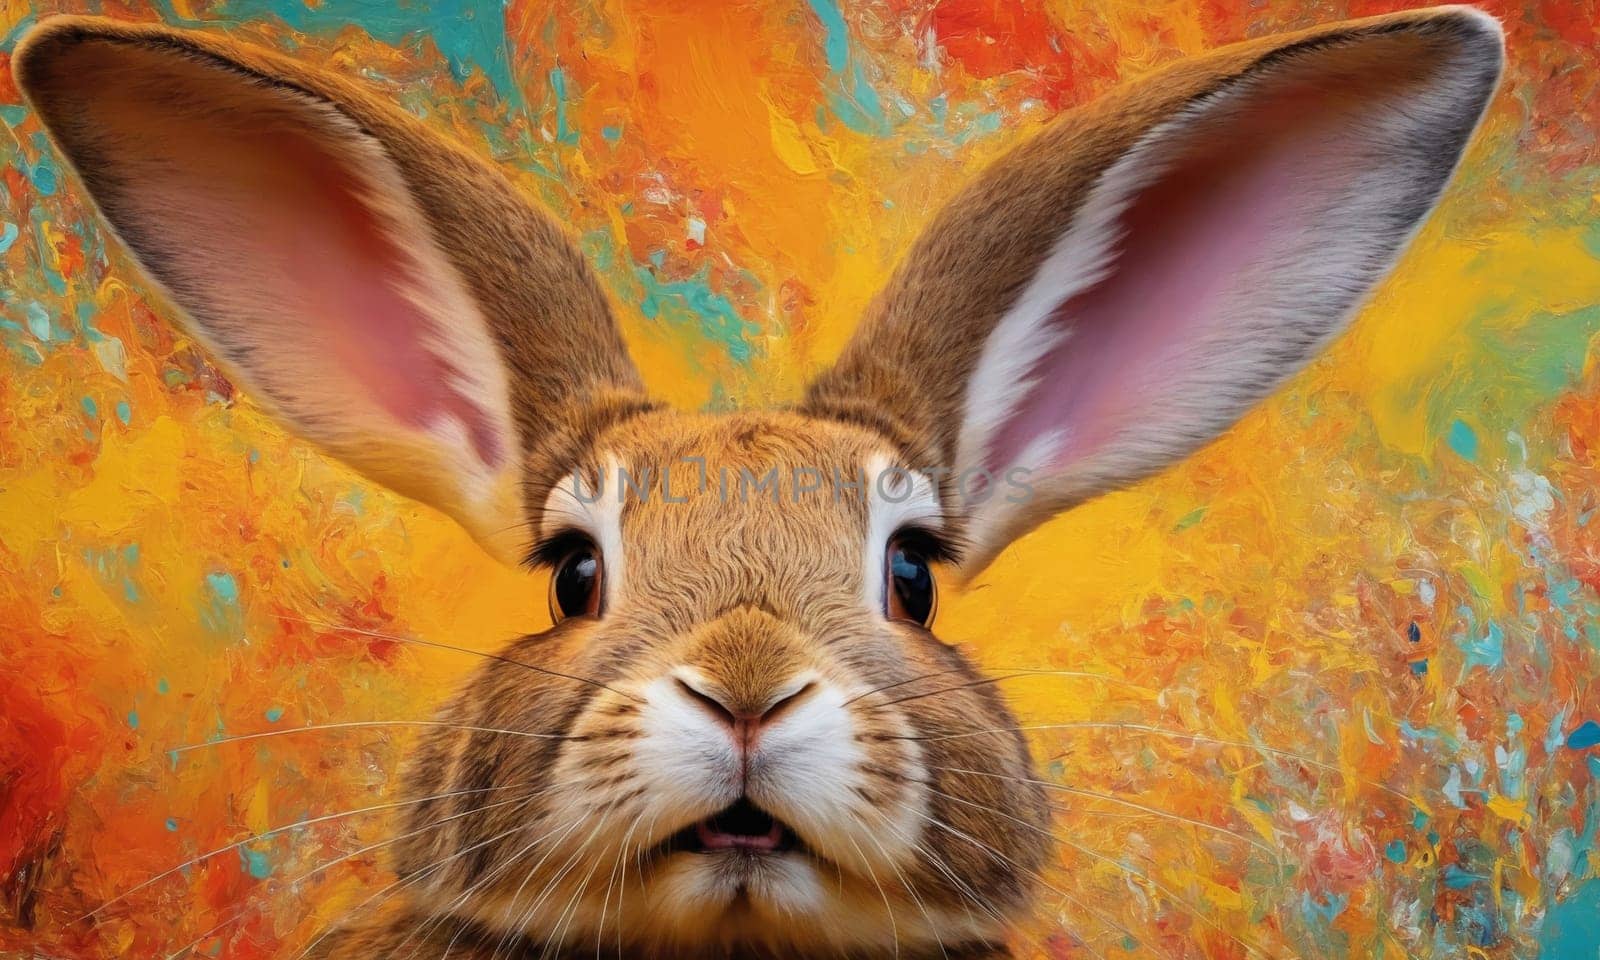 A captivating oil painting showcasing a majestic rabbit amidst a burst of vibrant colors. The detailed brushwork brings the subject to life against an abstract backdrop.